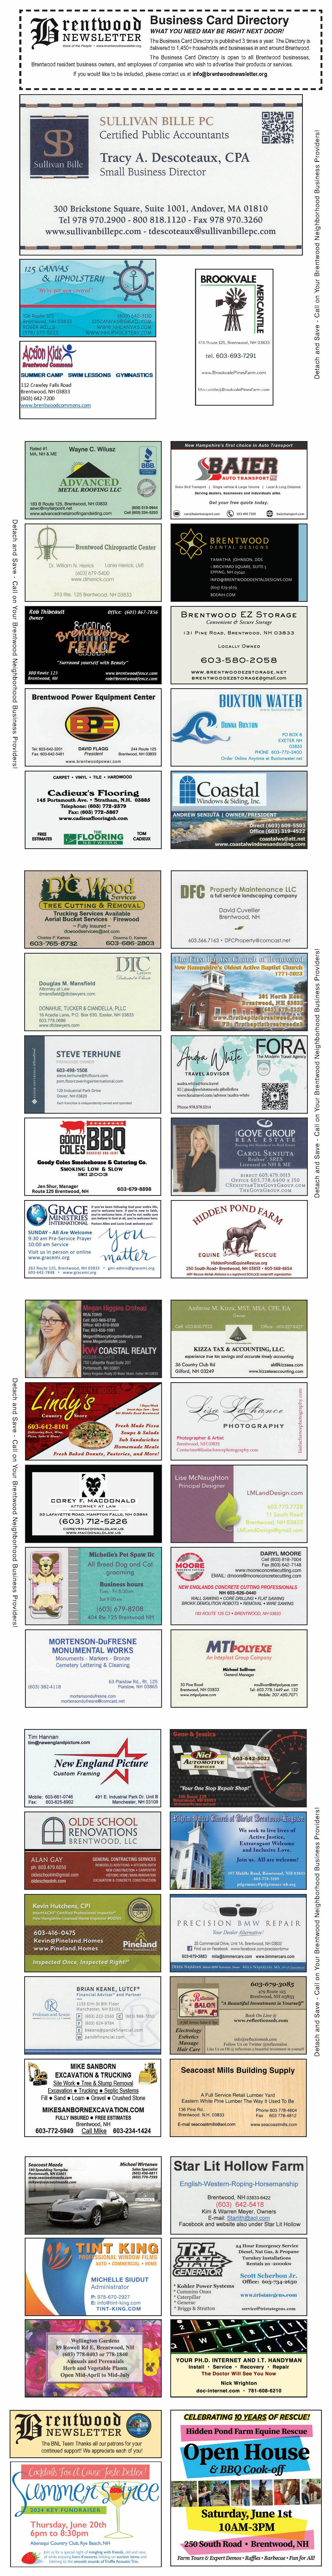 Brentwood, NH, business card directory